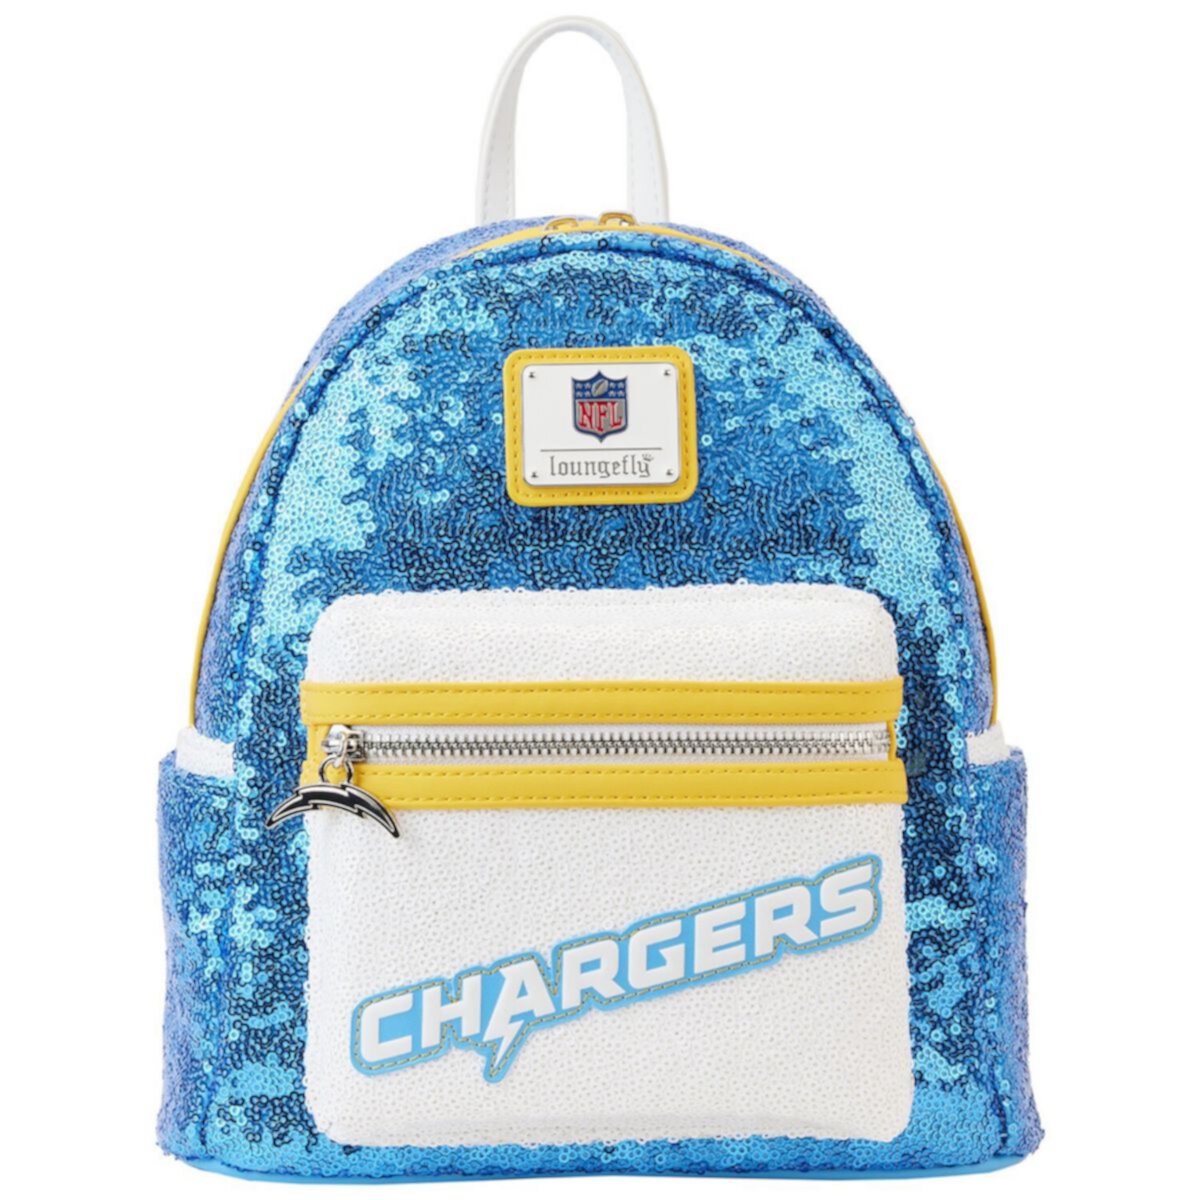 Мини-рюкзак с пайетками Loungefly Los Angeles Chargers Unbranded